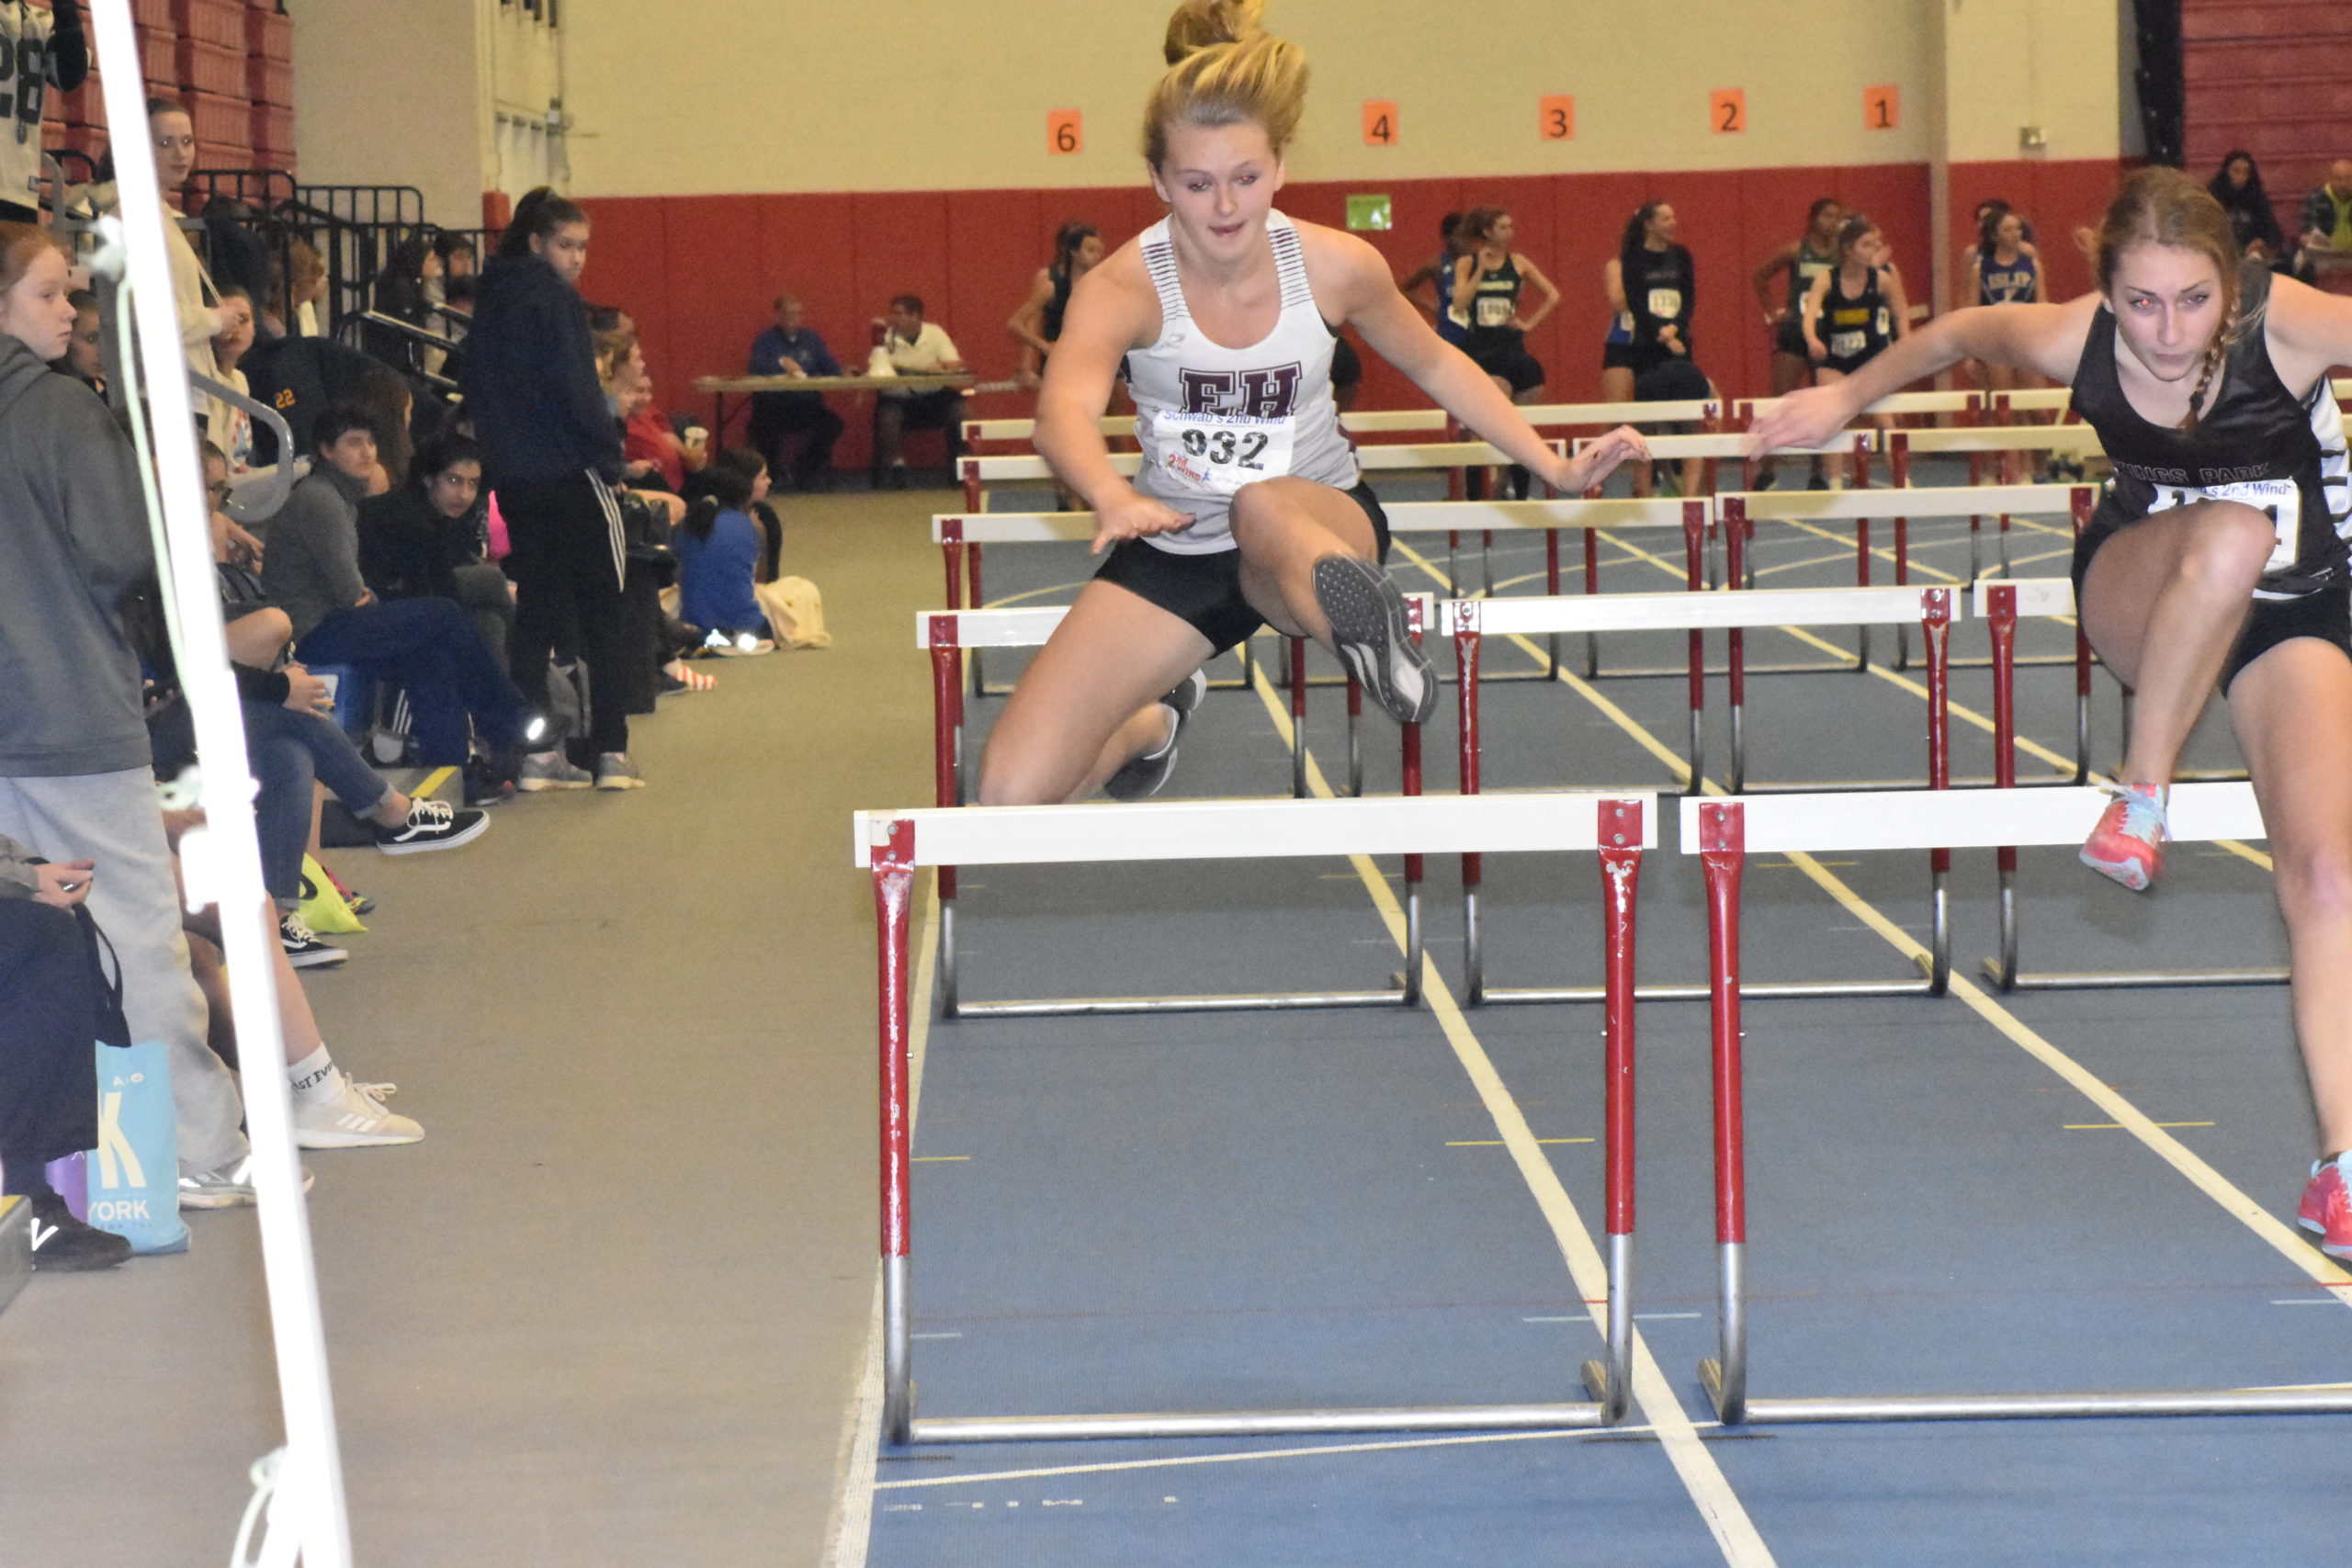 East Hampton sophomore Hanna Medler tied for 10th place in the 55-meter hurdles.